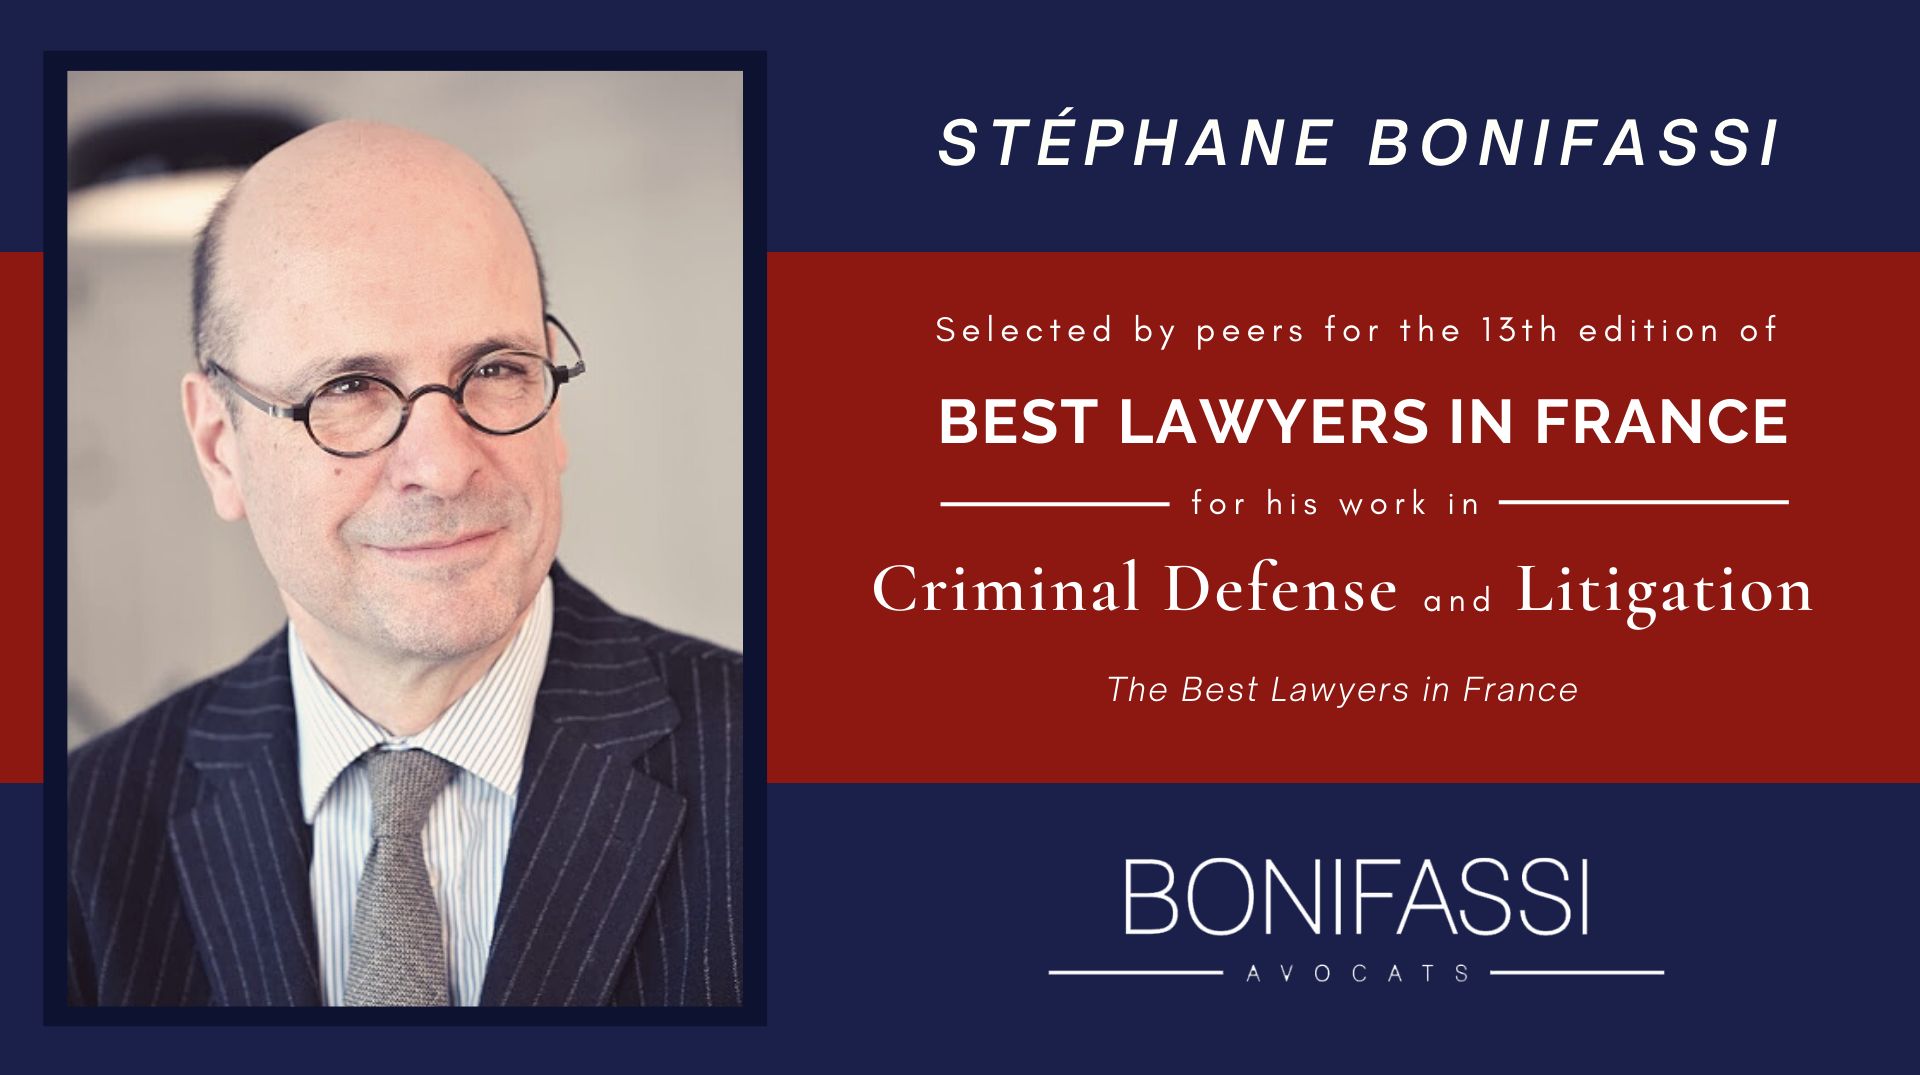 Bonifassi selected for Best Lawyers in work in criminal defense and litigation work